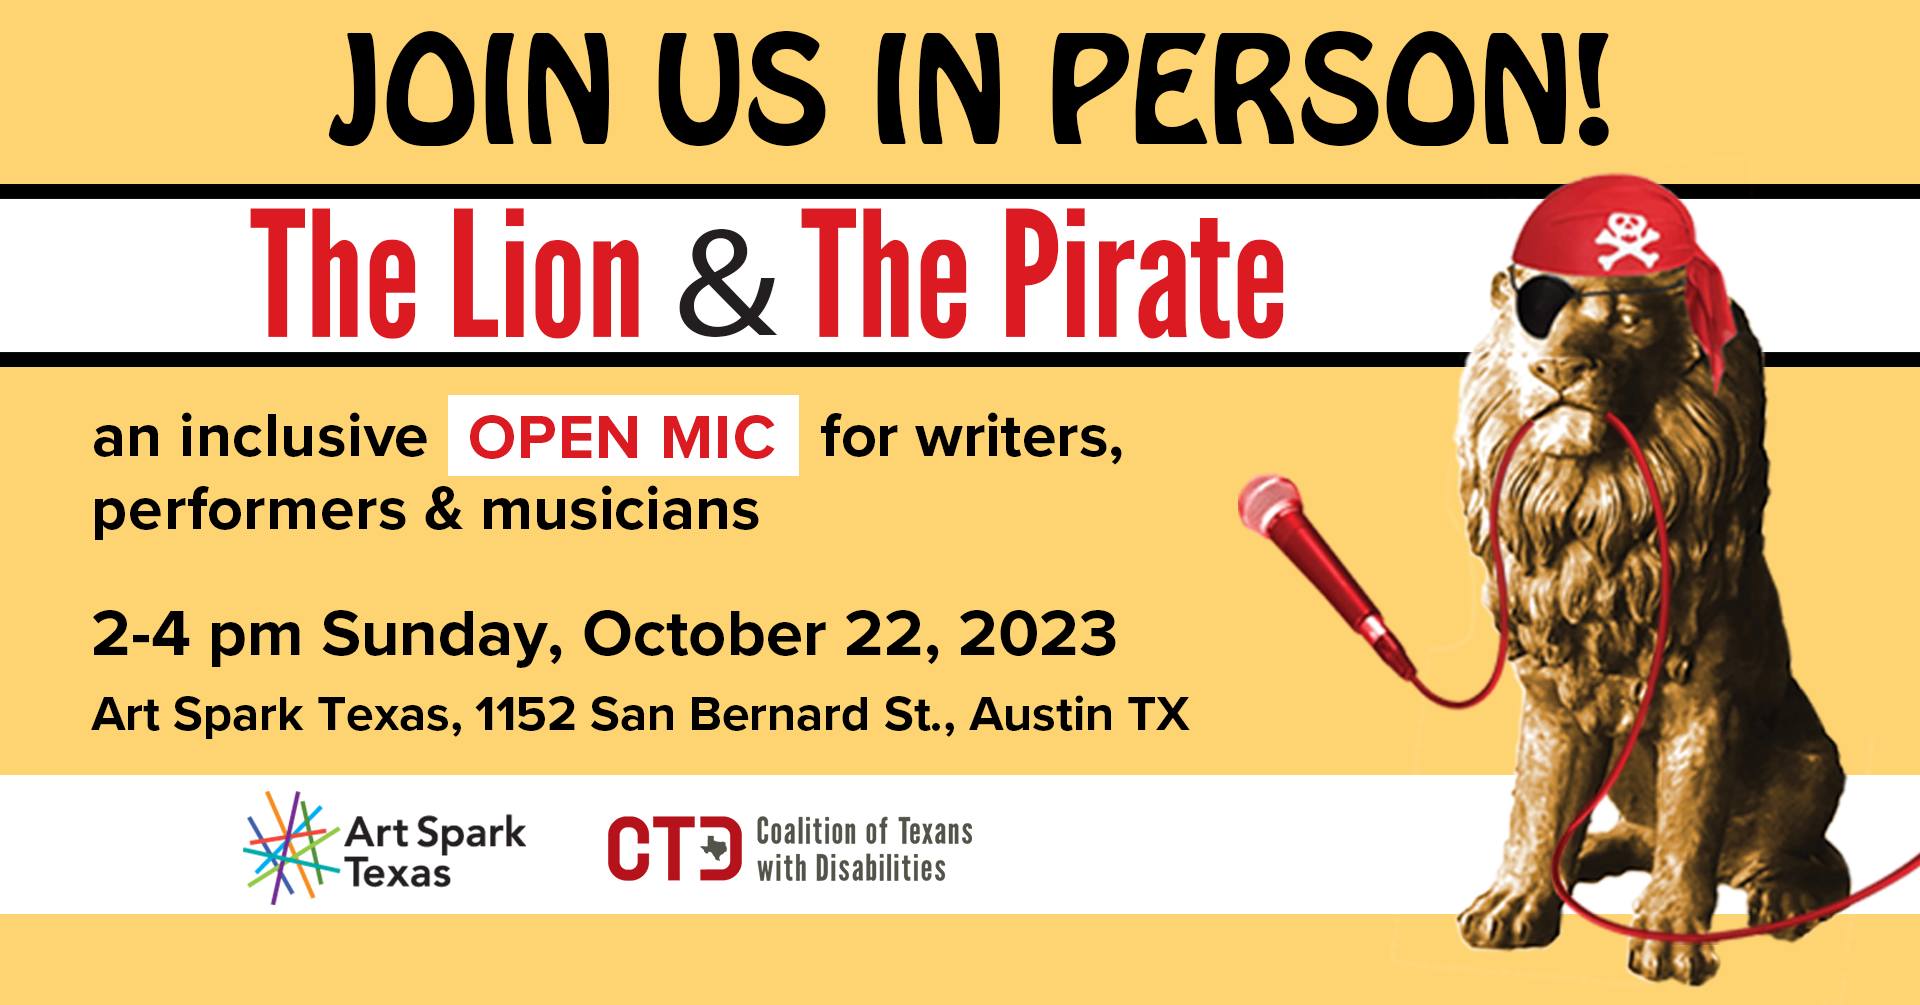 The Lion & Pirate Open Mic IN PERSON - Art Spark Texas